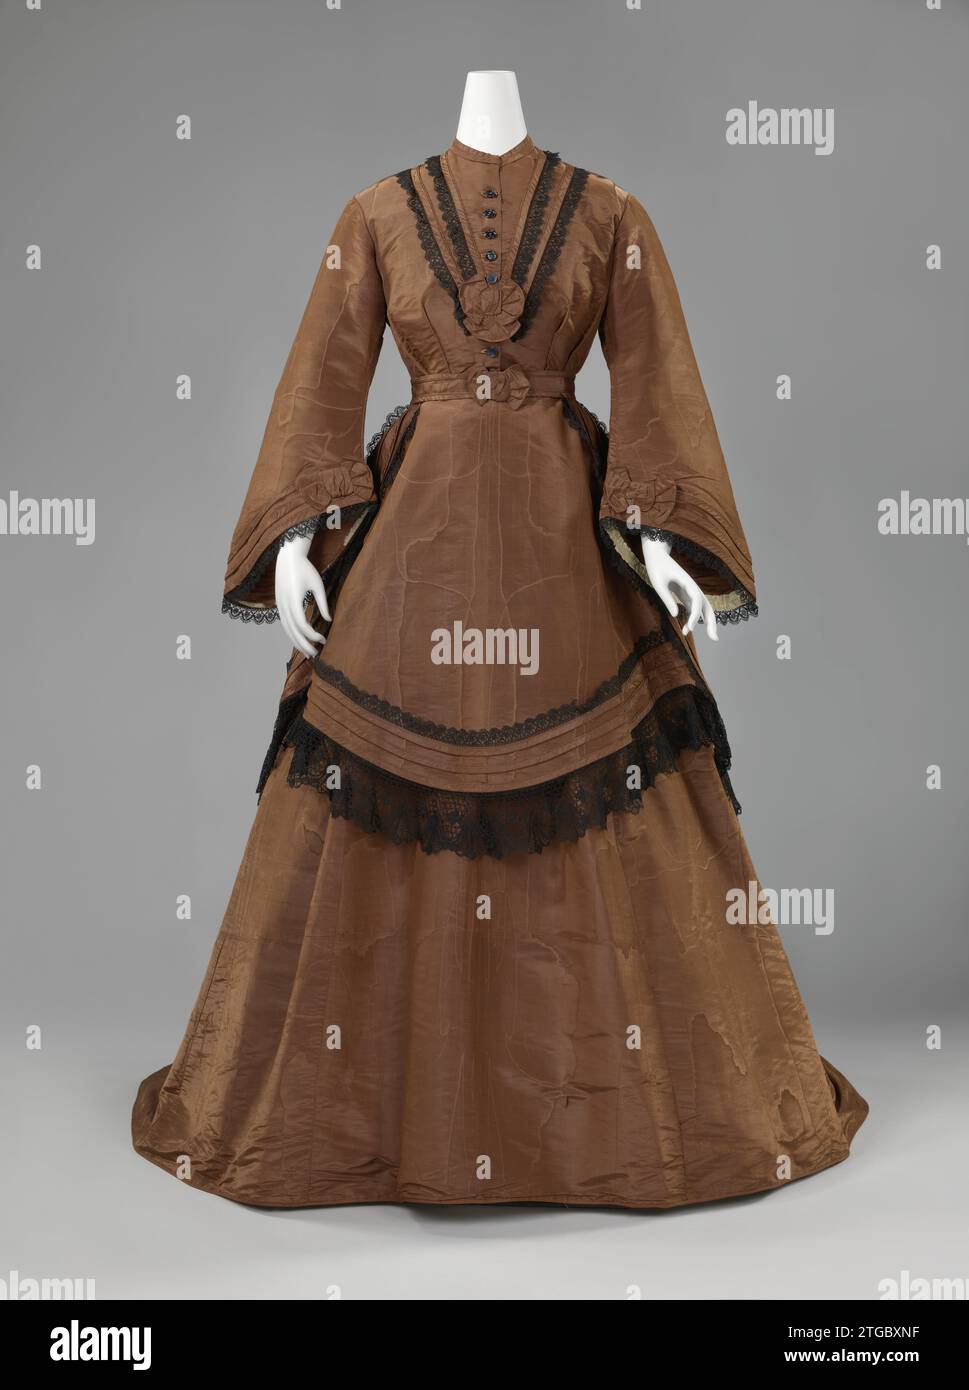 Body with very short sleeve, halfway decorated with a stitched edge, and layer of the shoulders of brown moiré side, lined with brown -glossed cotton, anonymous, c. 1868 - c. 1872 Body with very short sleeve, halfway decorated with a stitched edge, and low on the shoulders, of brown moiré side, lined with brown -glossed cotton.  silk. Body with very short sleeve, halfway decorated with a stitched edge, and low on the shoulders, of brown moiré side, lined with brown -glossed cotton.  silk. Stock Photo